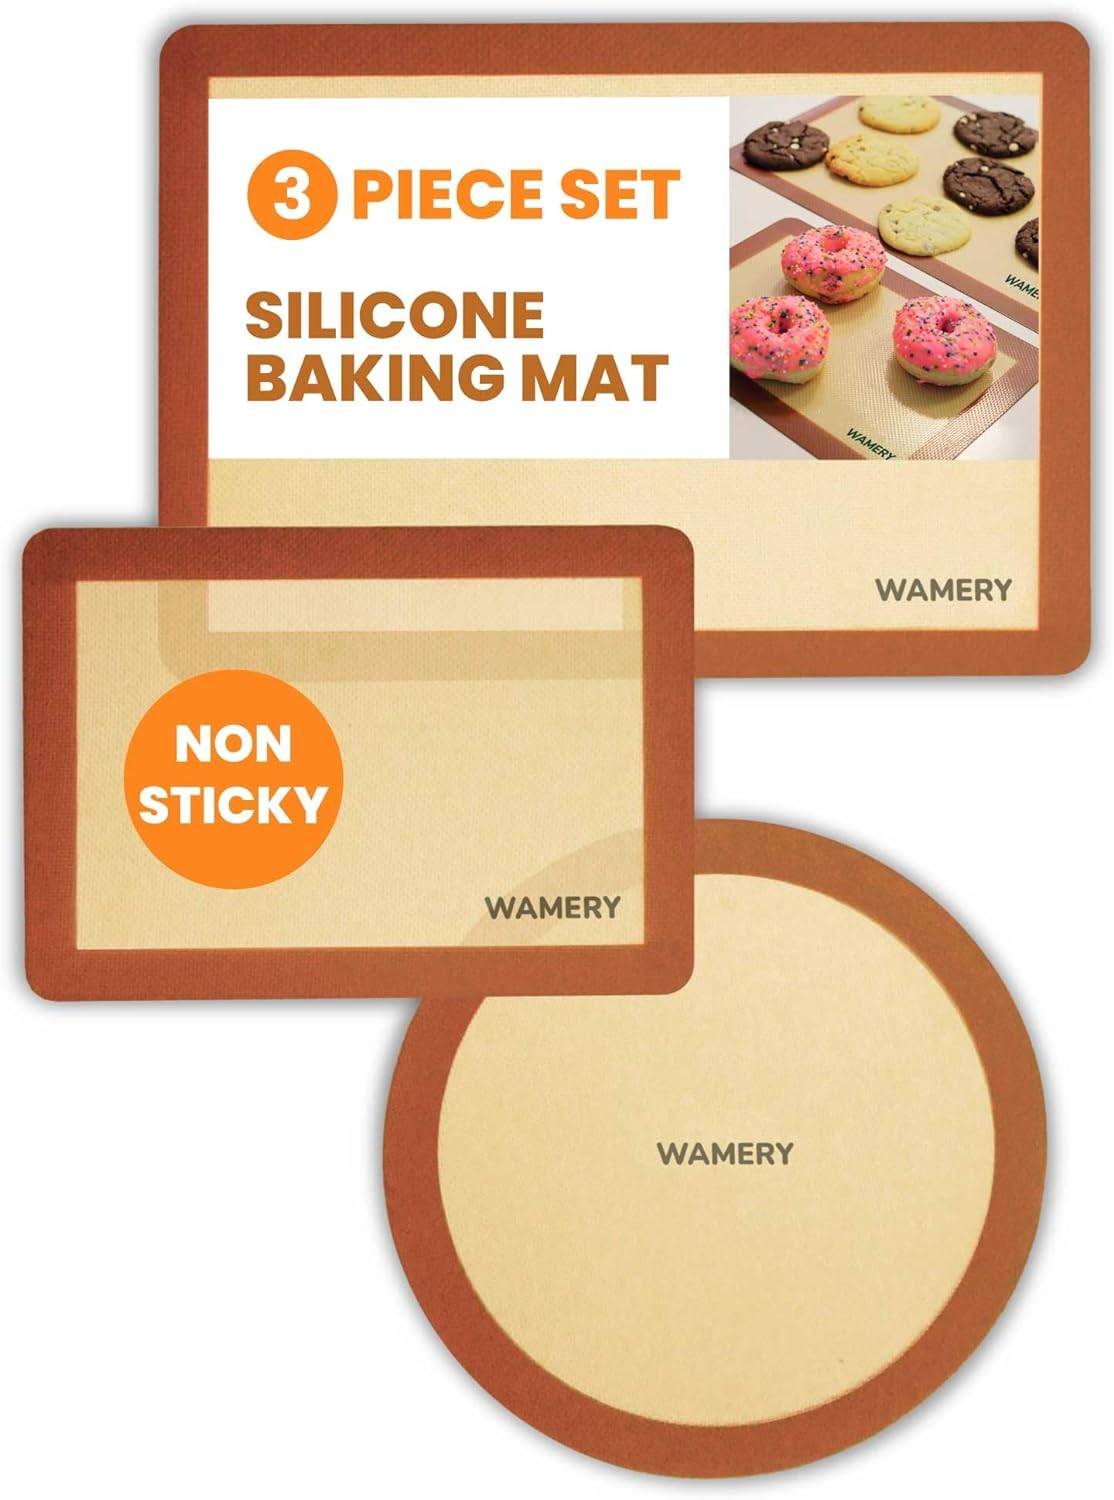 20% OFF Silicone Baking Mat 3pack $19.19